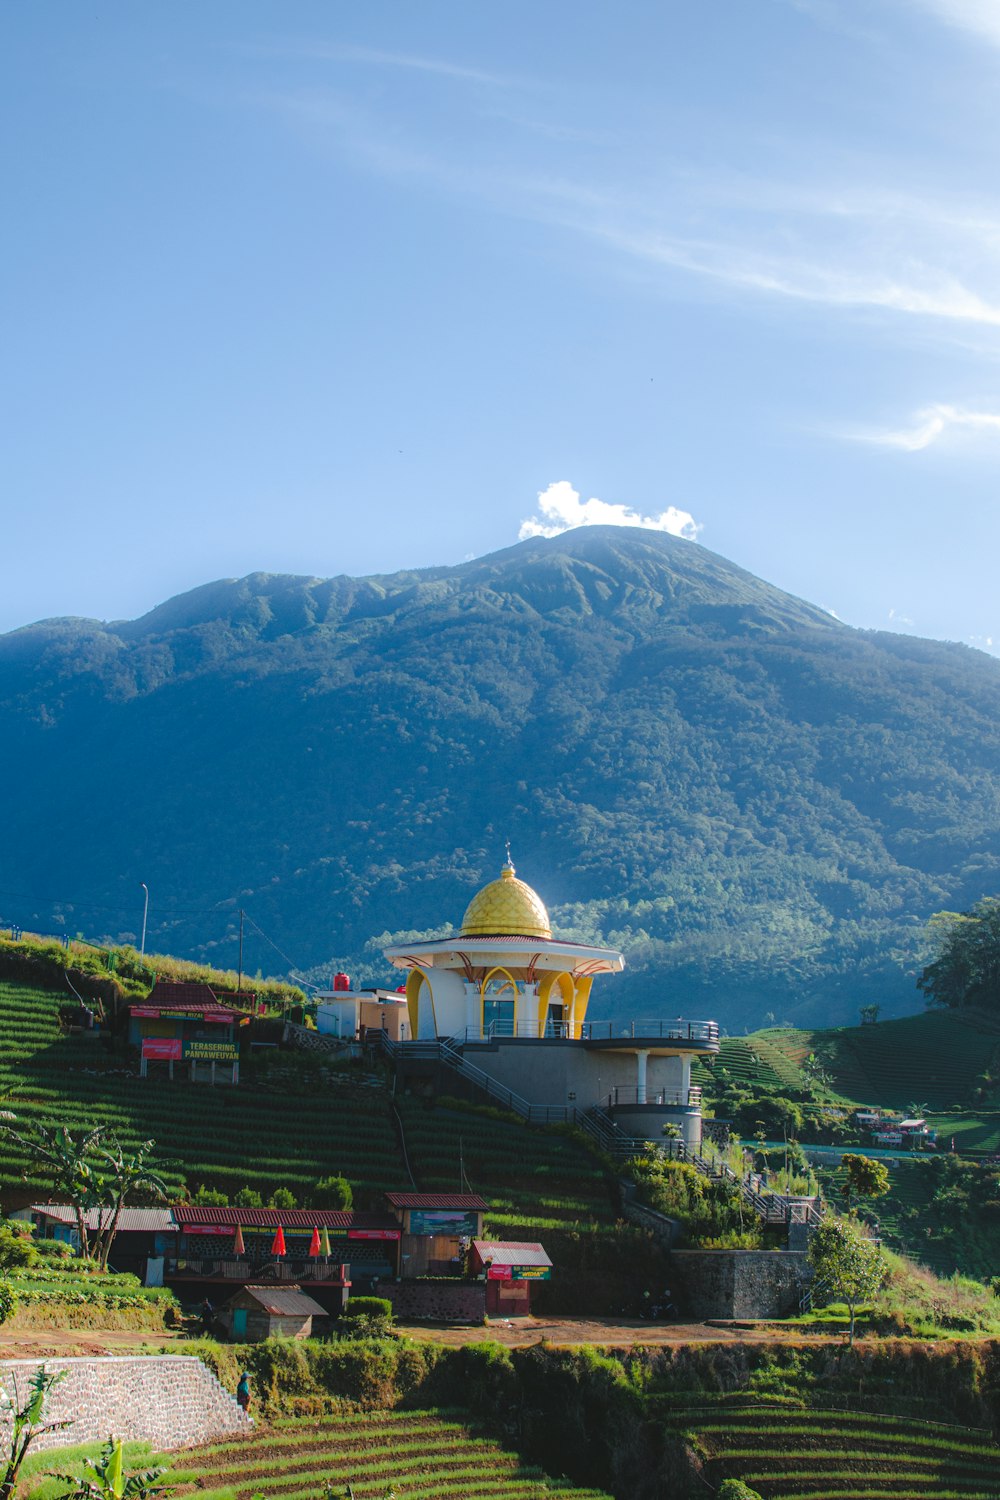 a scenic view of a mountain with a yellow dome